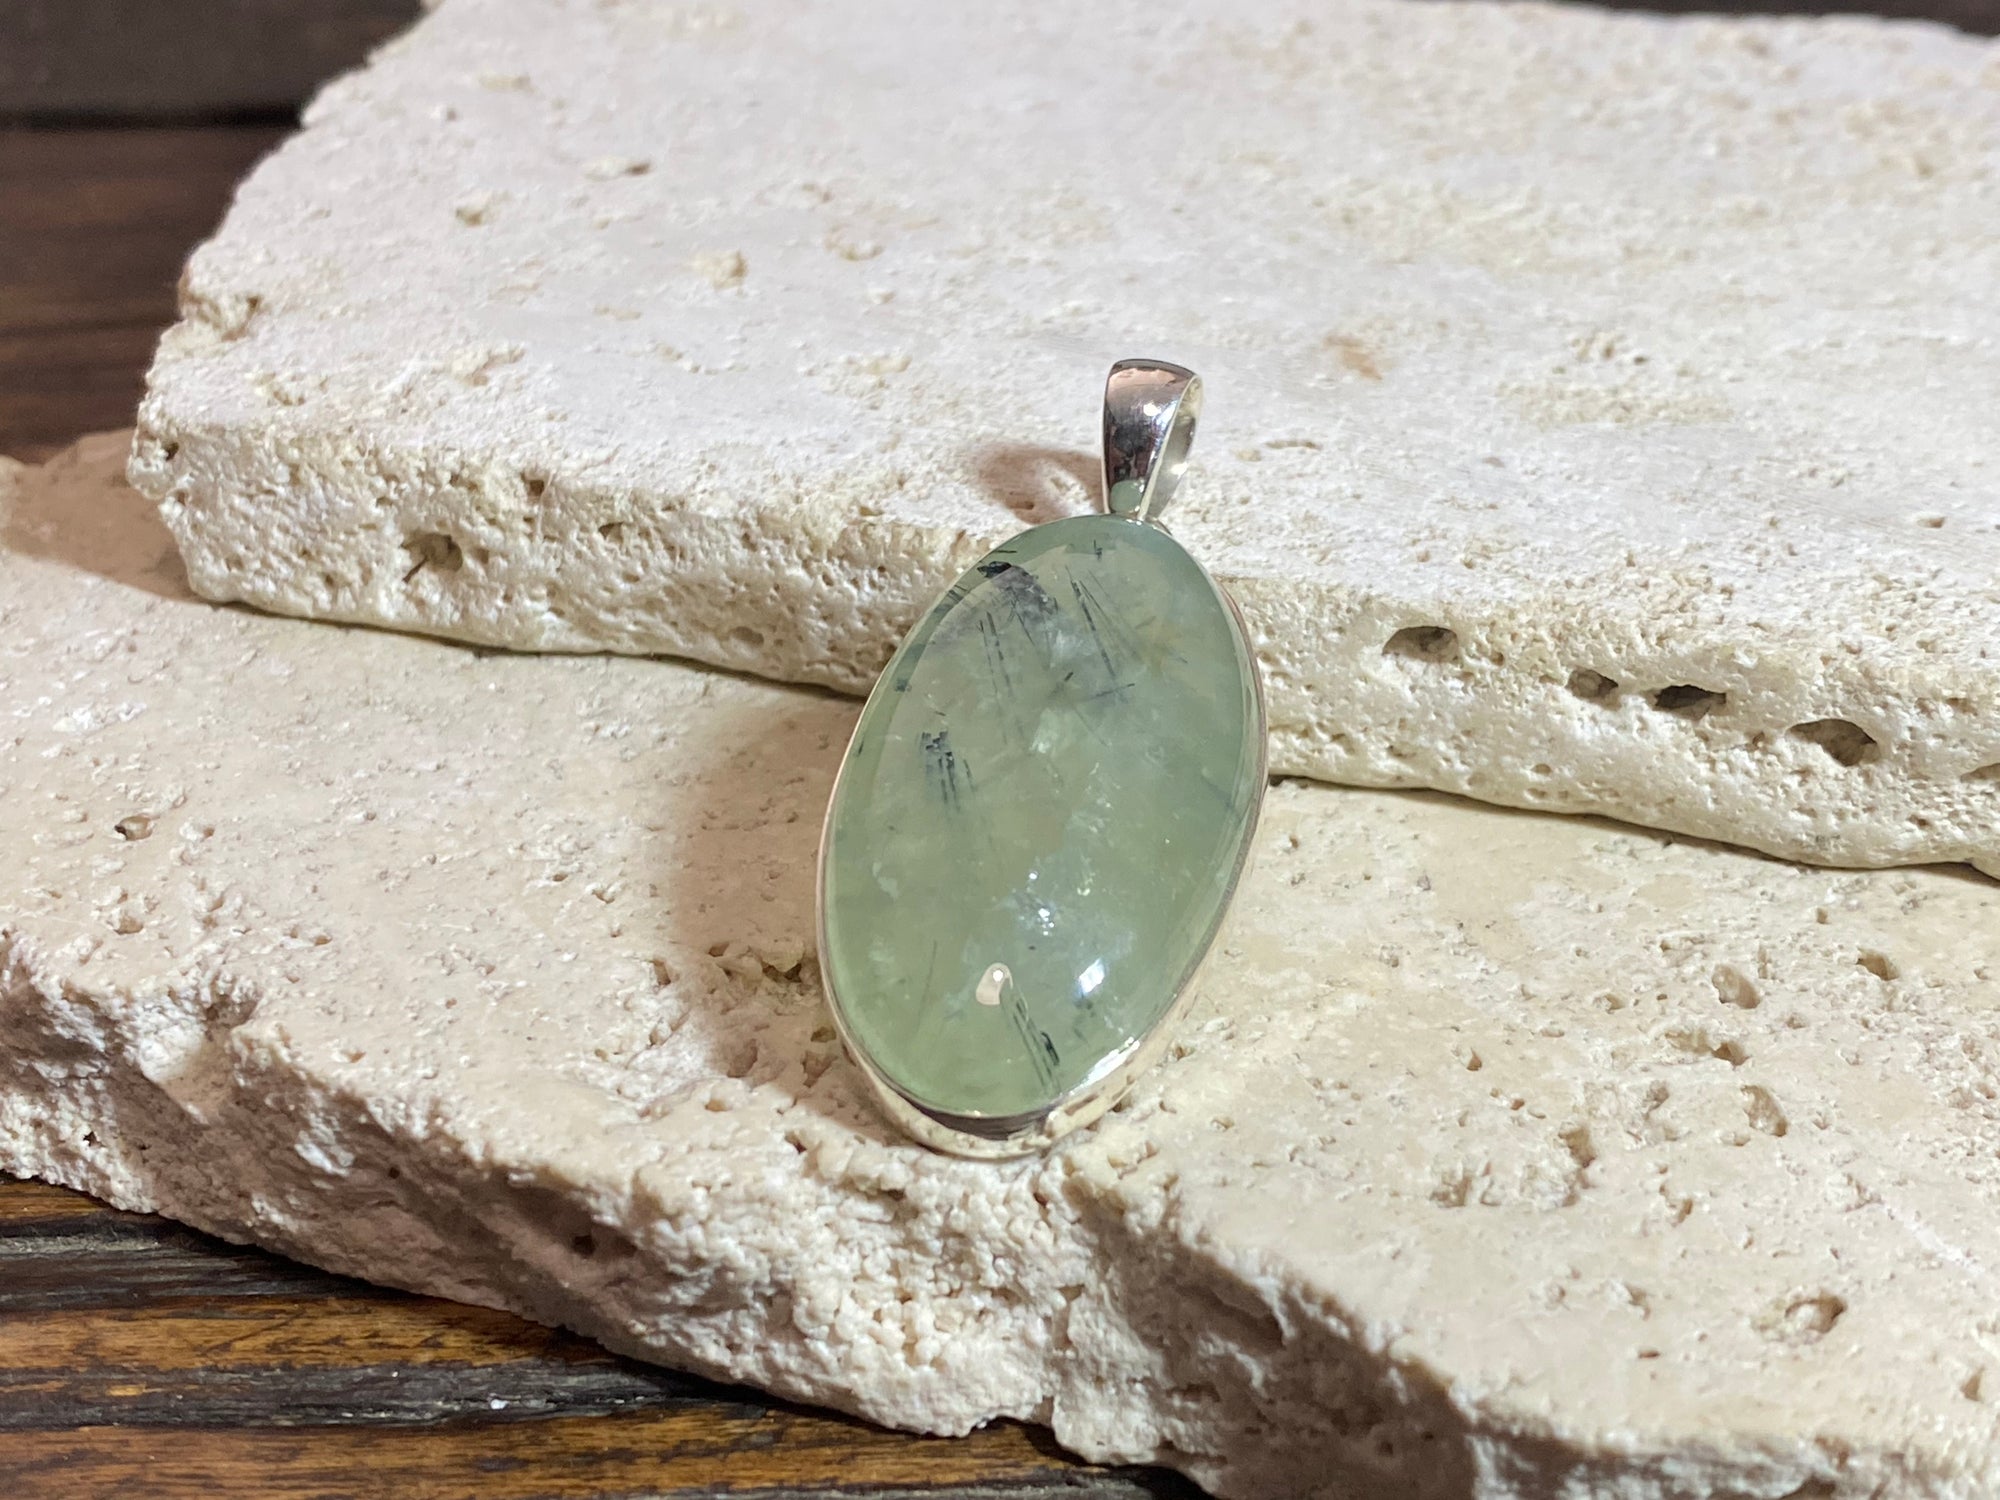 Large oval green prehnite with tourmaline inclusions set in a silver surround with a silver bail that is generous enough to take large chains or cords.